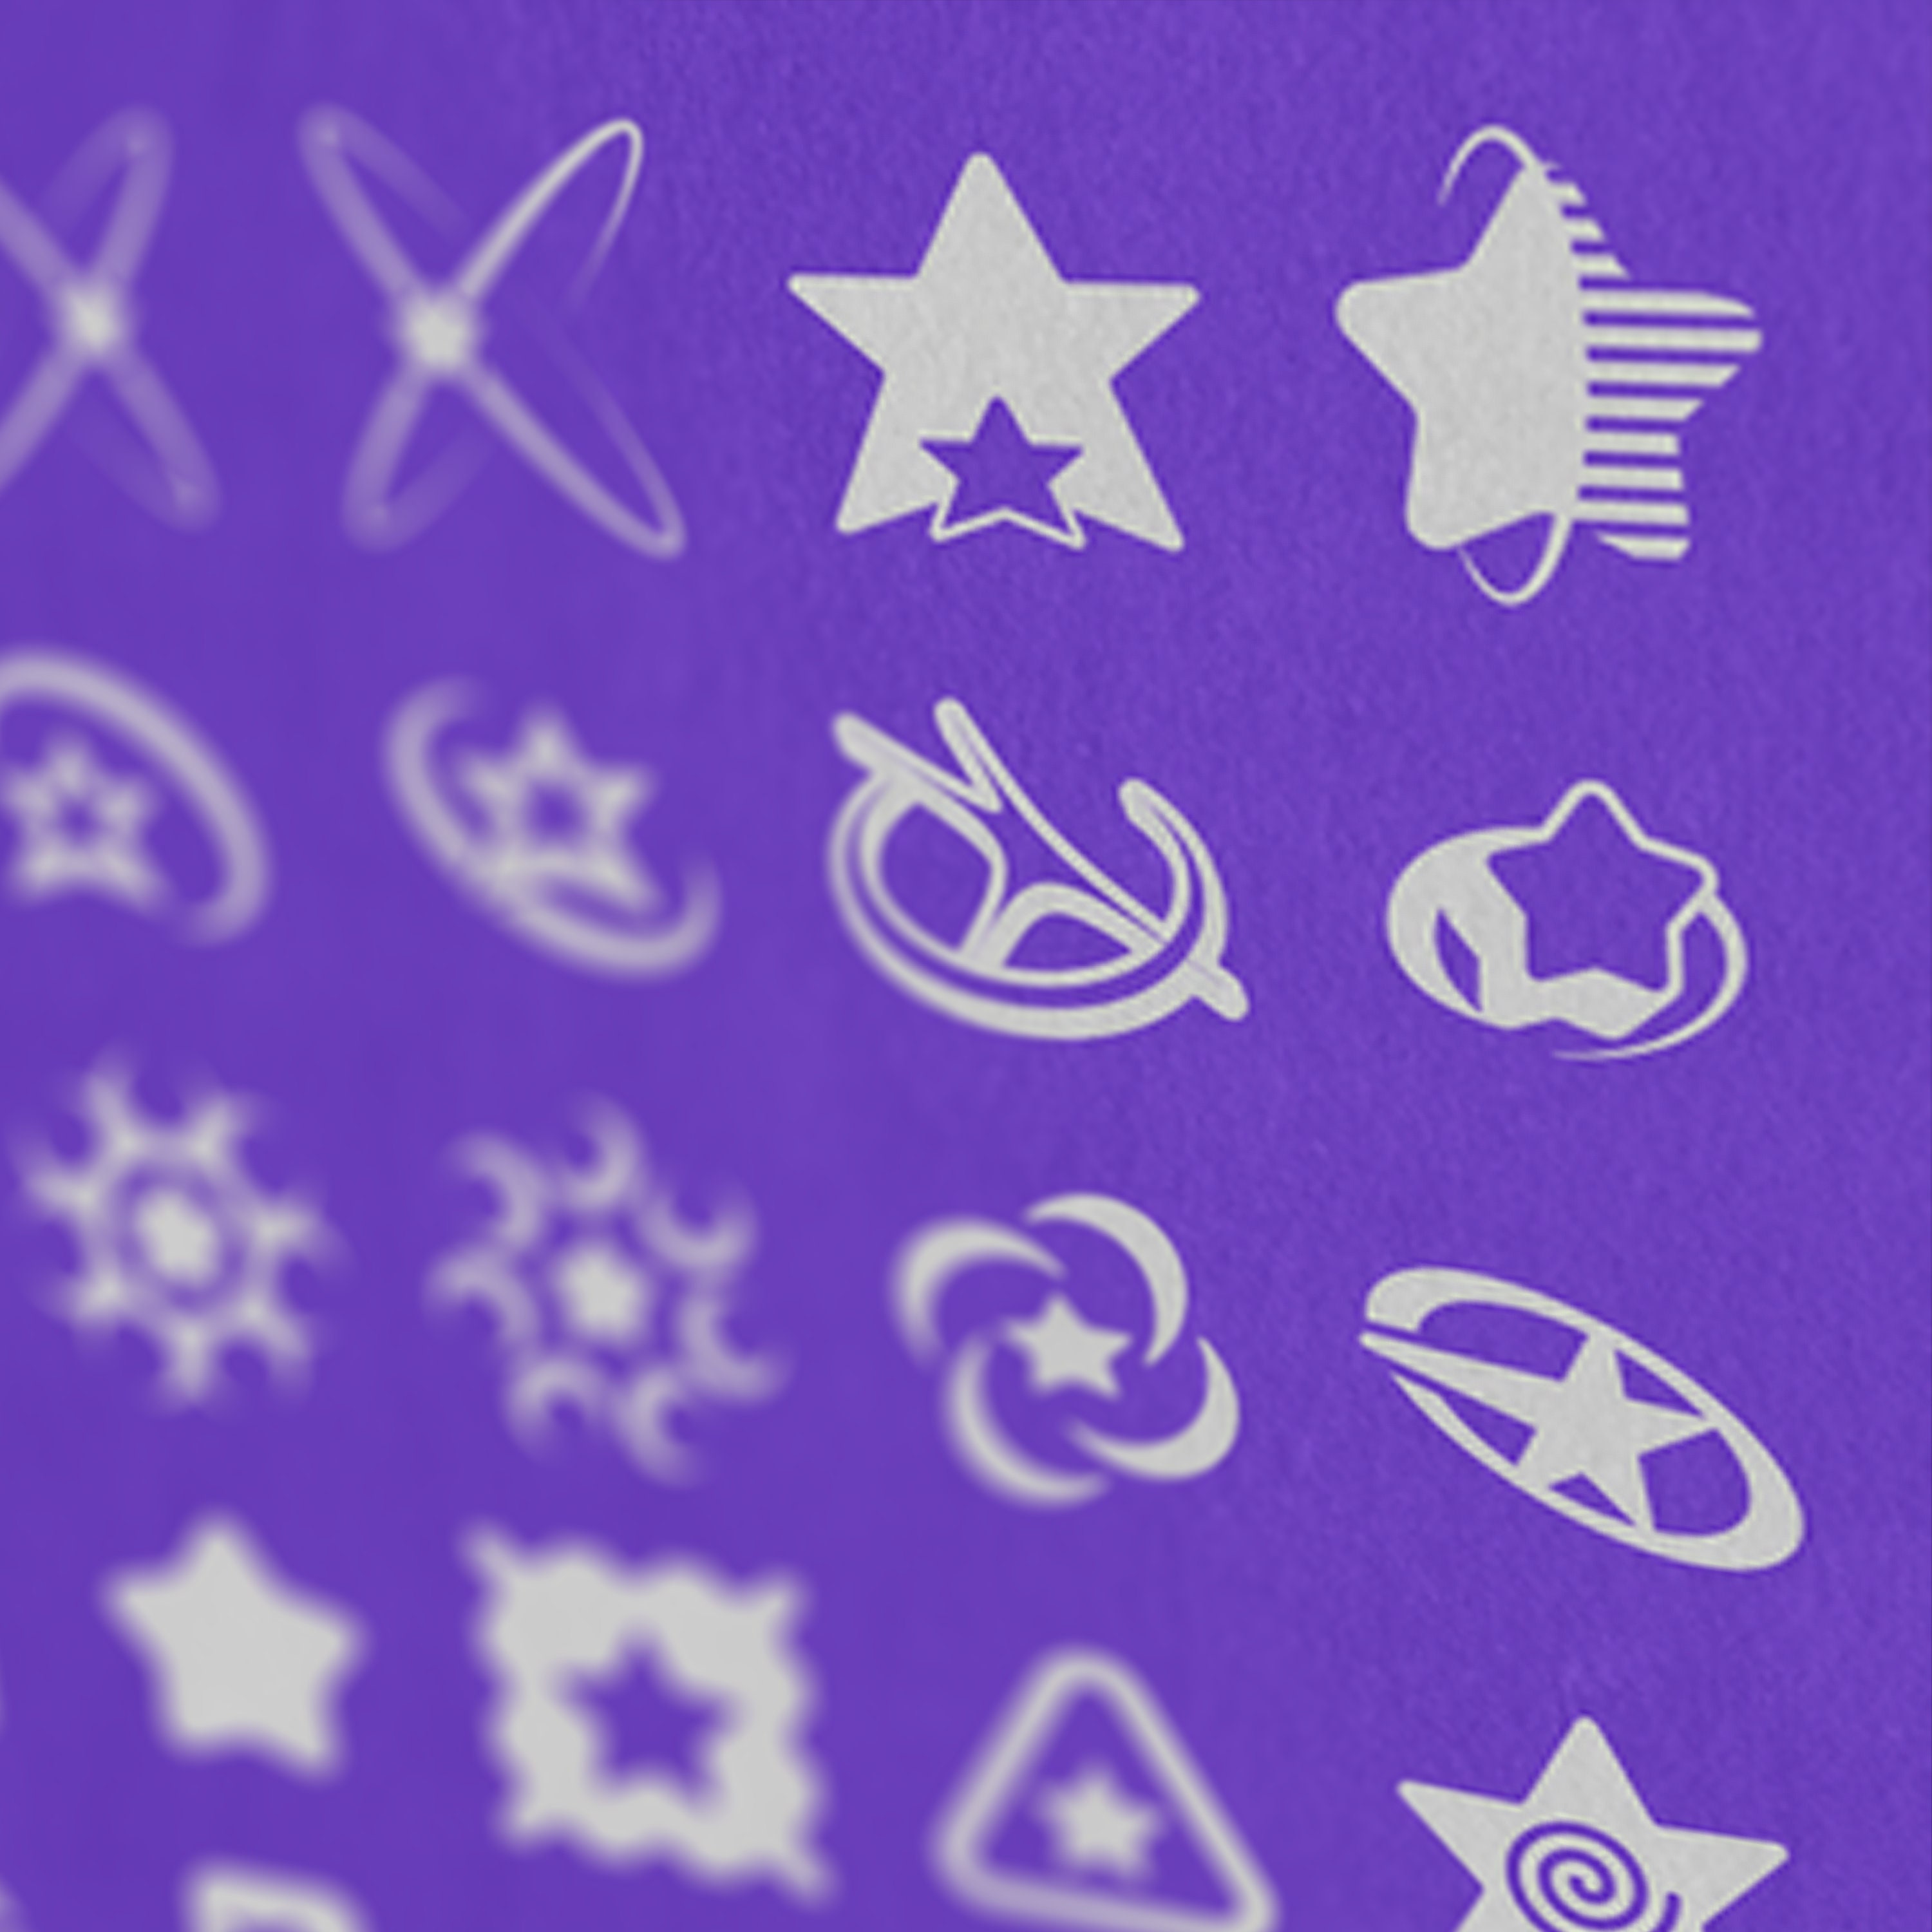 40+ CELESTIAL STARS AND ICONS ASSETS PACK VOL. 01 — The Visual